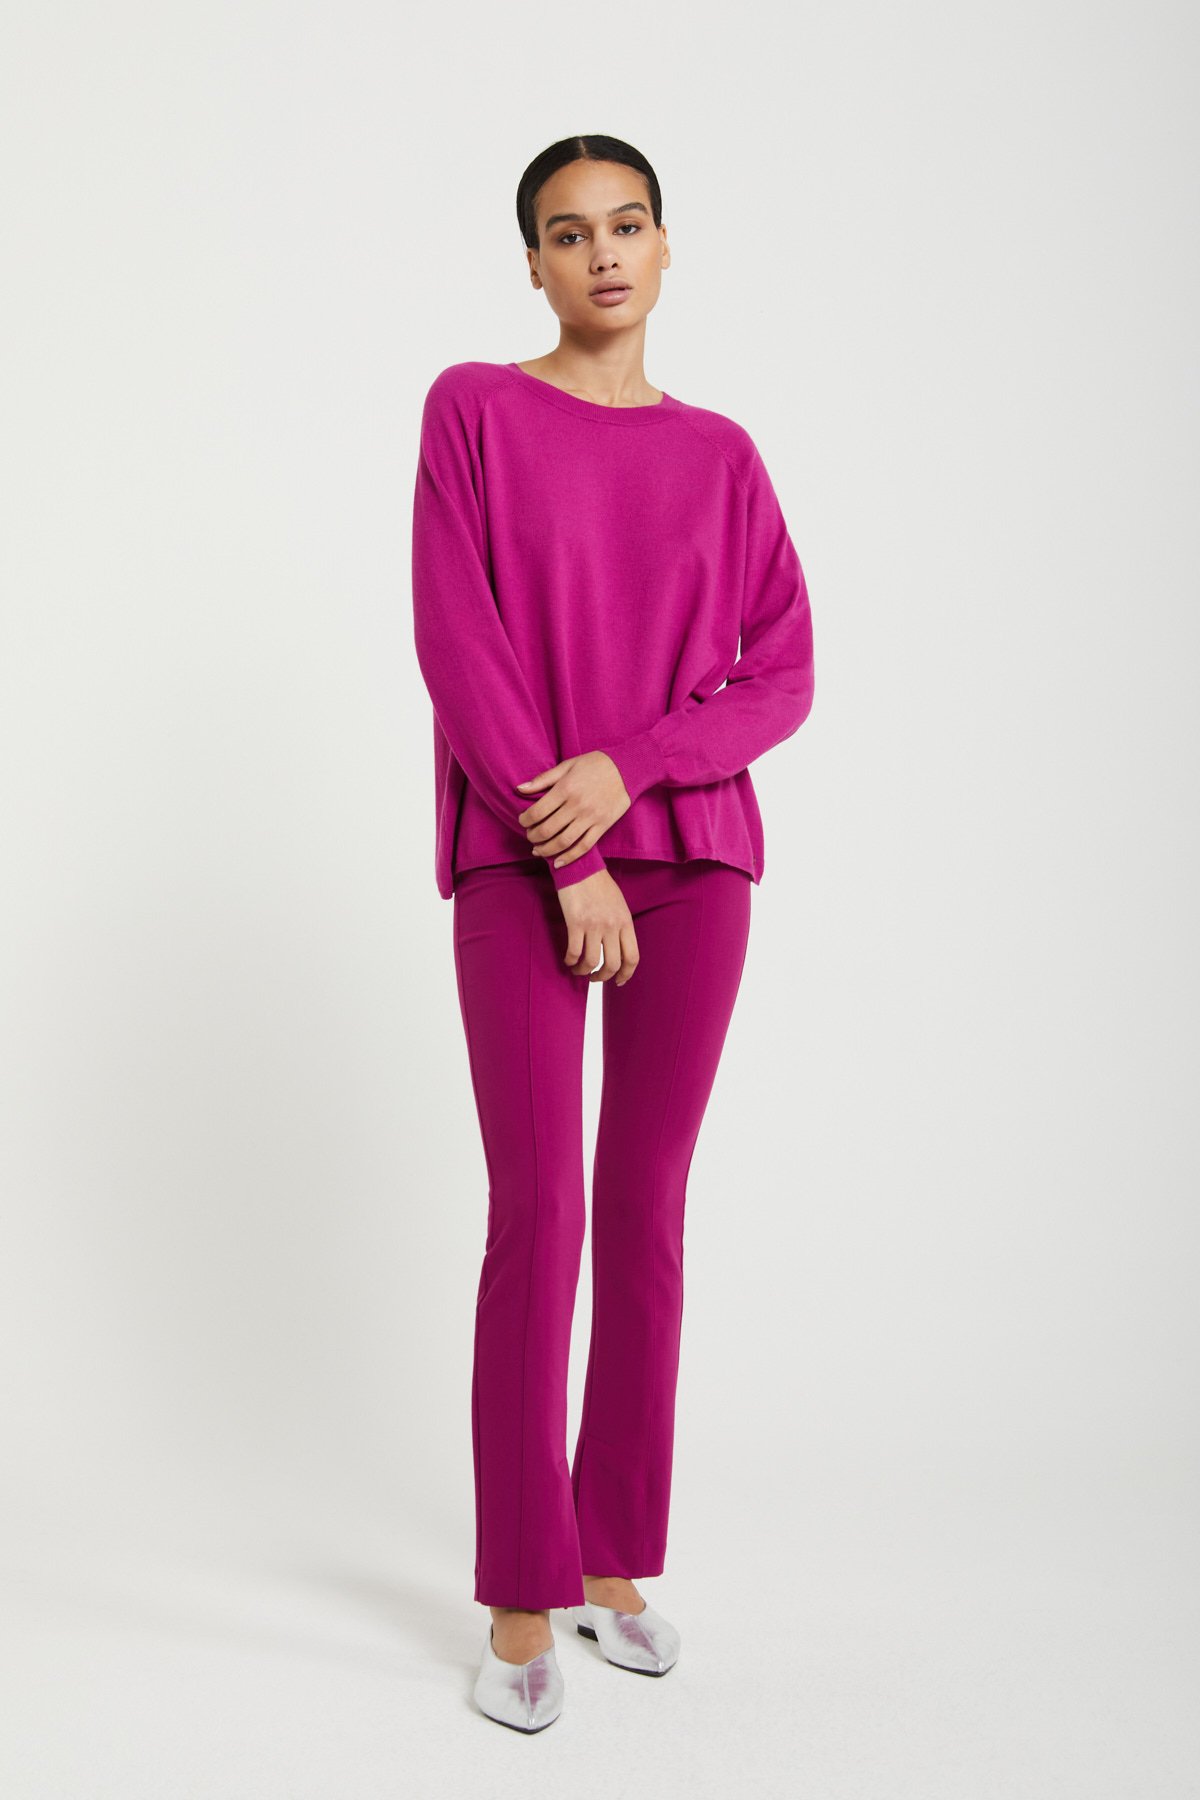 Jumper with rounded neck